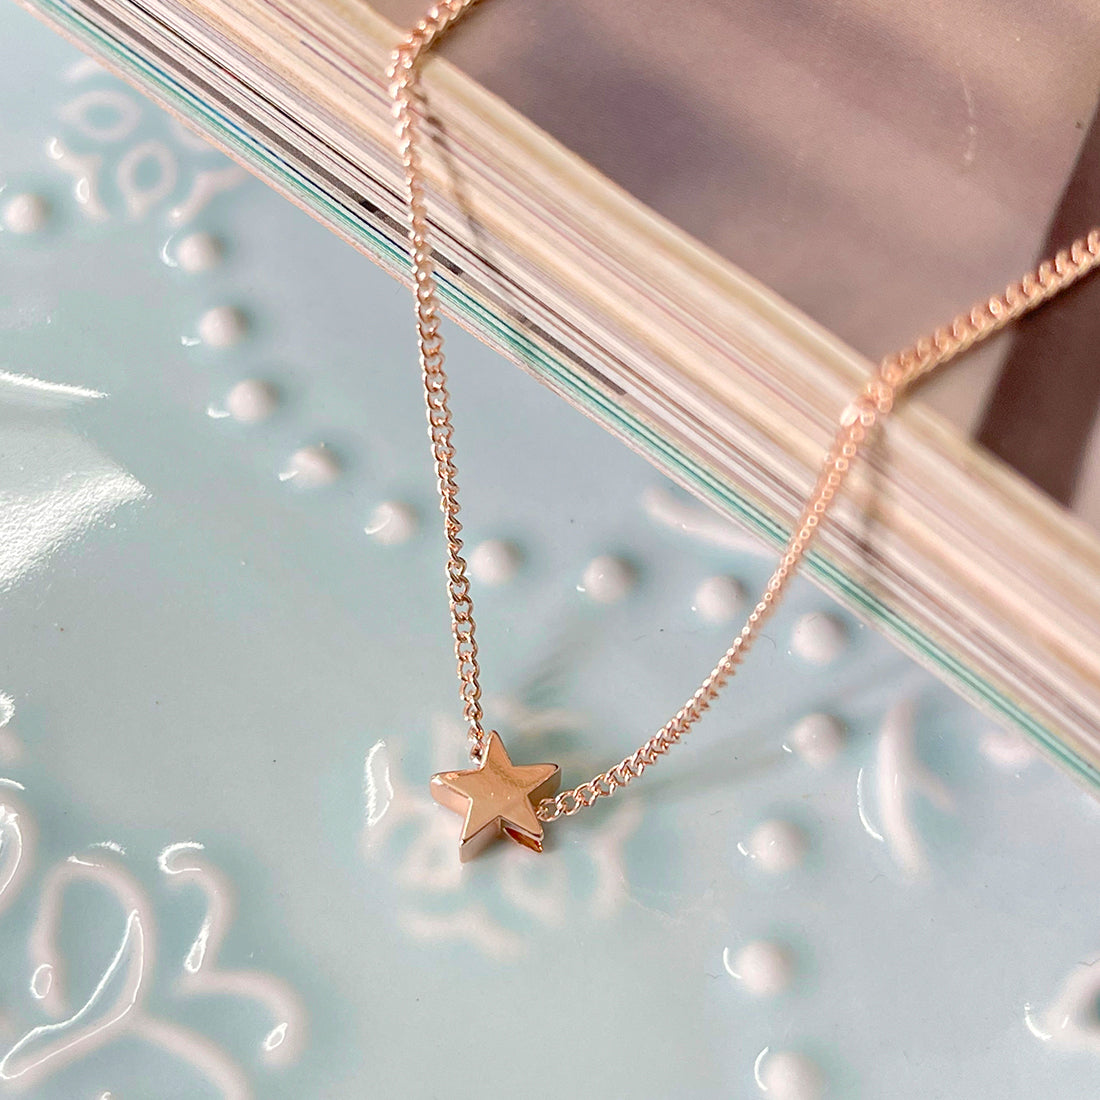 Star Mini Pendant Rose Gold-Toned Dainty Necklace